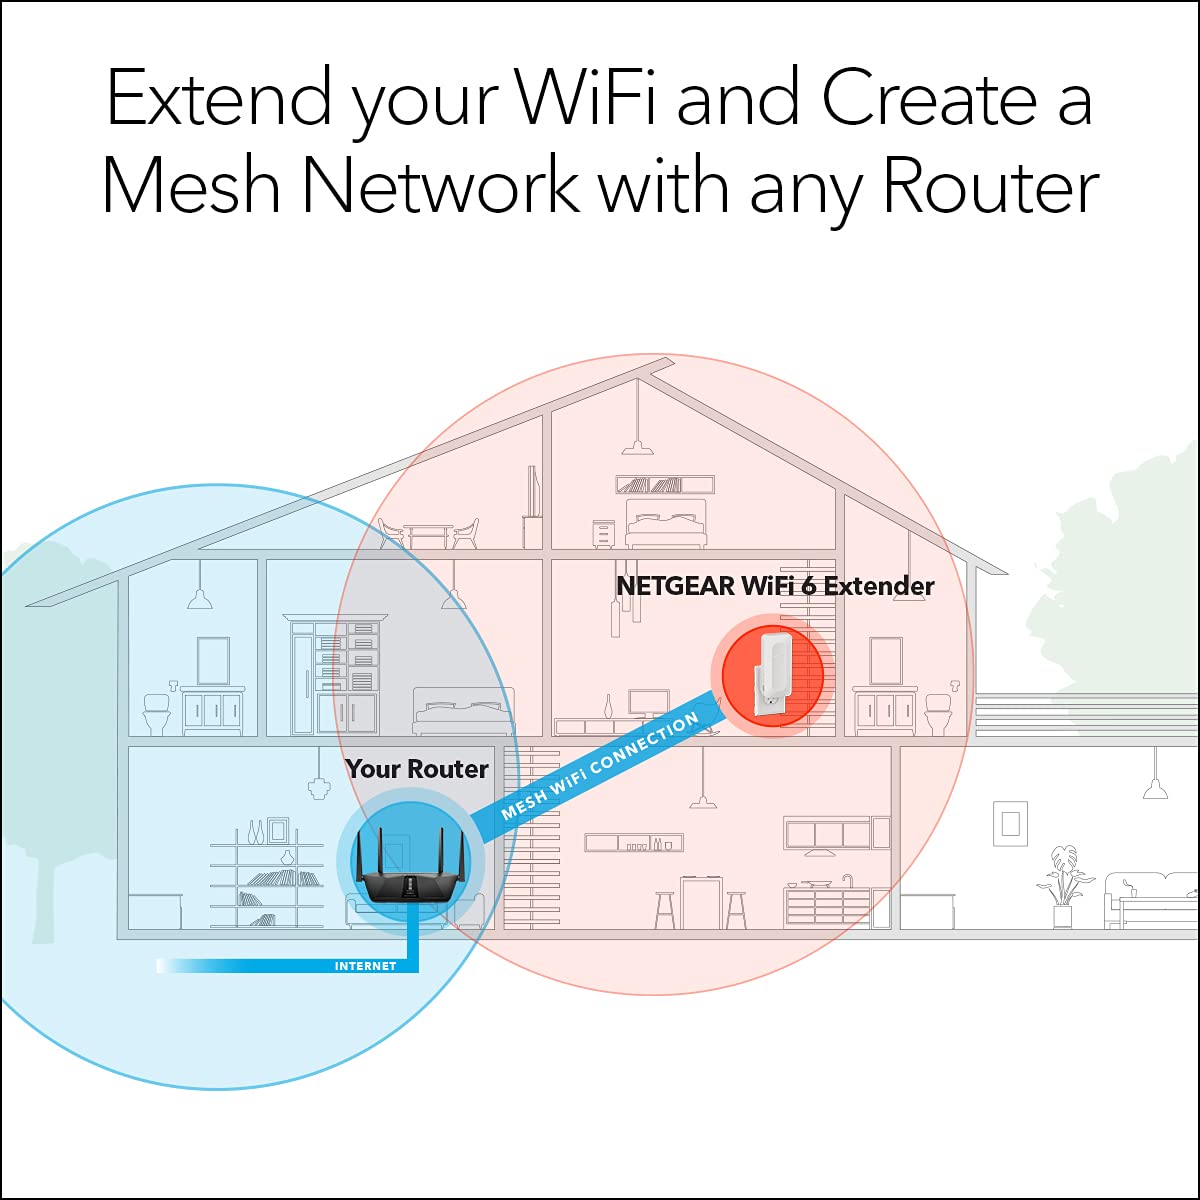 NETGEAR WiFi 6 Mesh Range Extender (EAX12) - Add up to 1,200 sq. ft. and 15+ Devices with AX1600 Dual-Band Wireless Signal Booster & Repeater (up to 1.6Gbps Speed), WPA3 Security, Smart Roaming